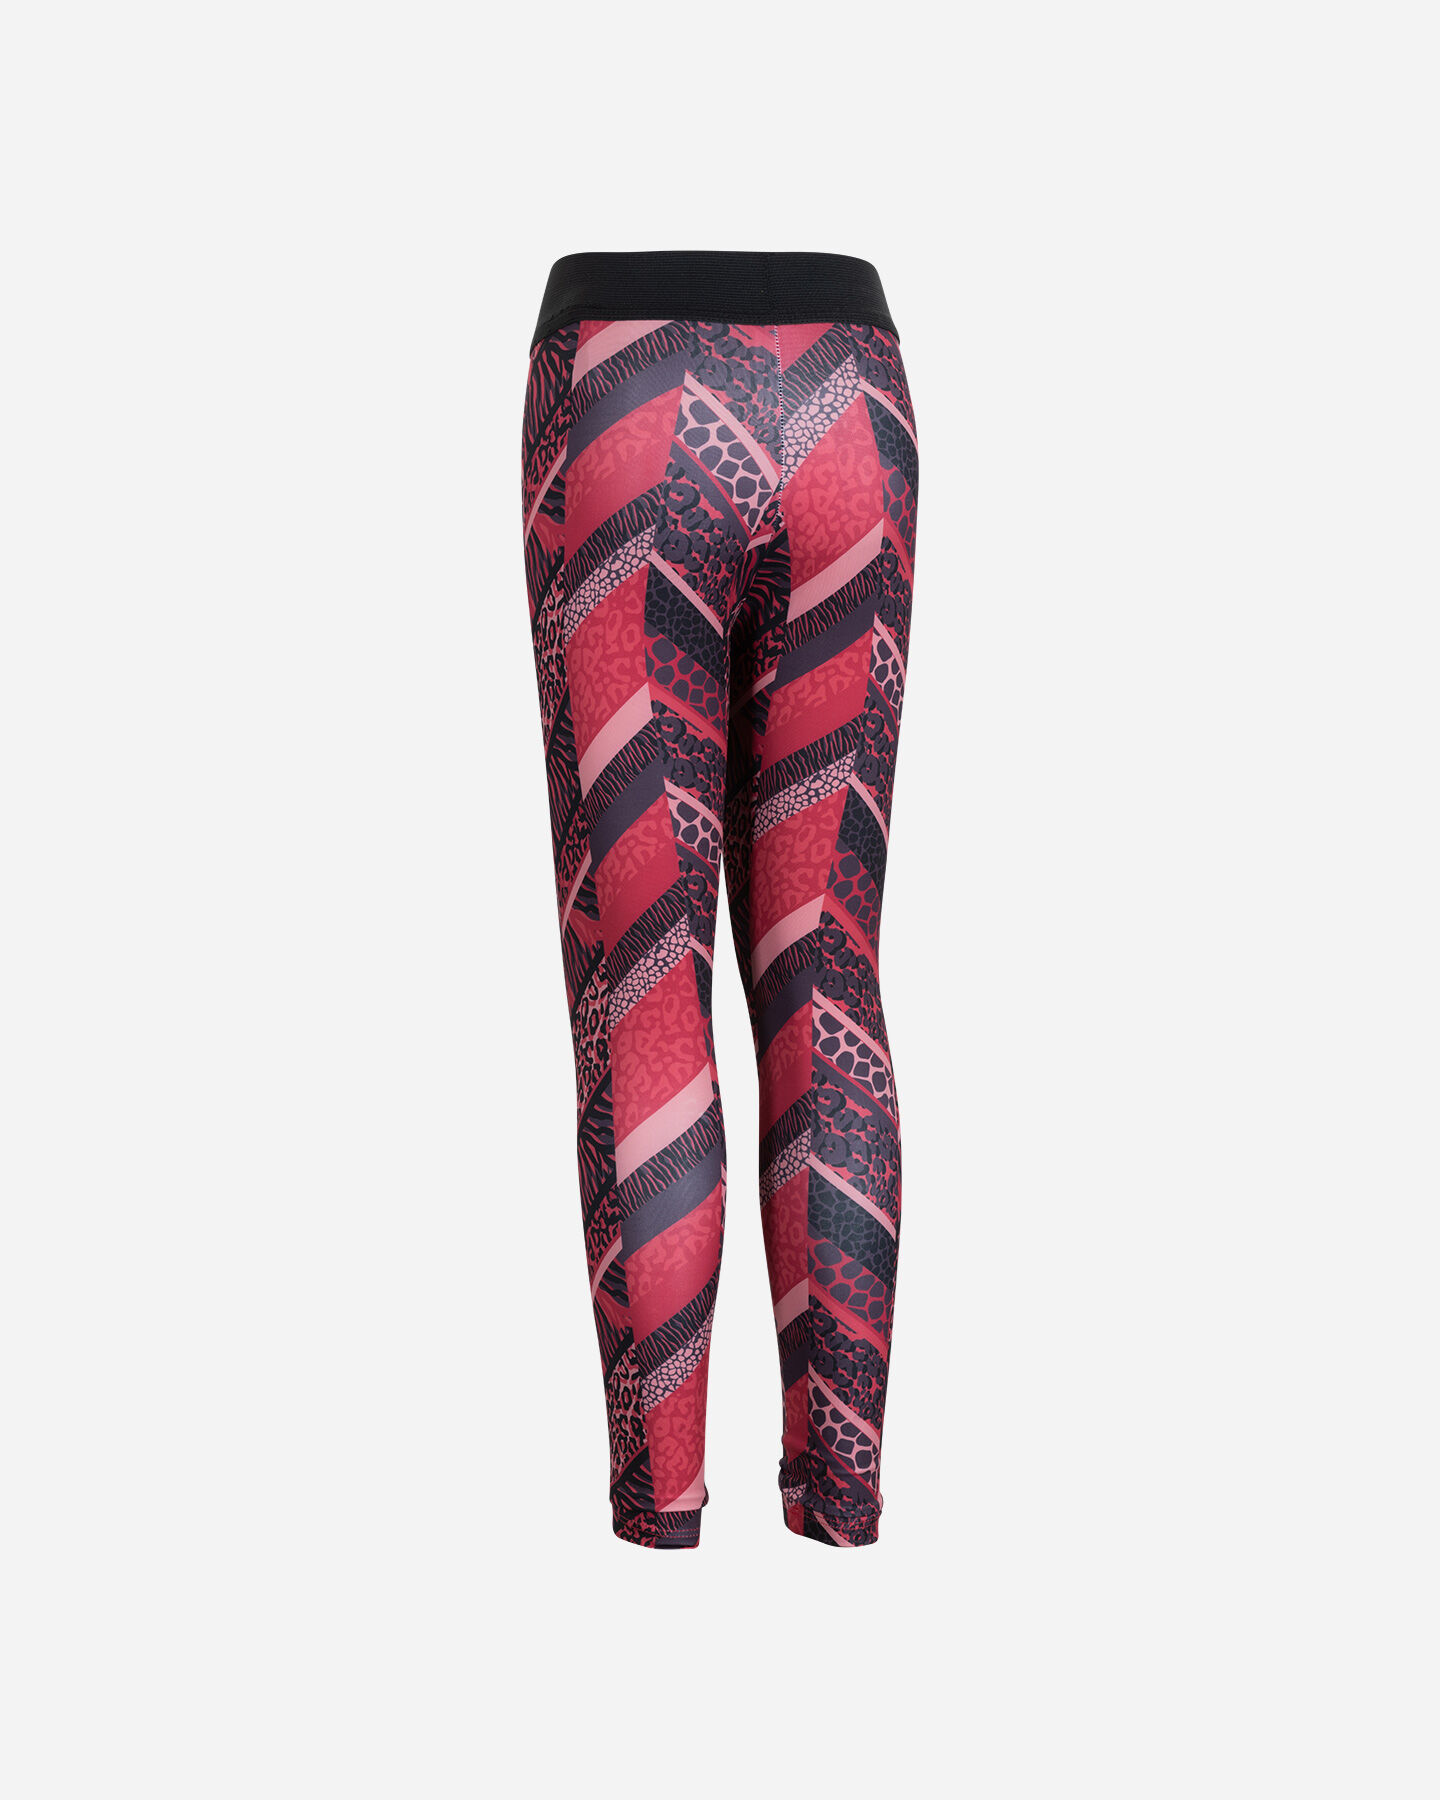  Leggings ARENA ATHLETIC JR S4106176|896|4A scatto 1